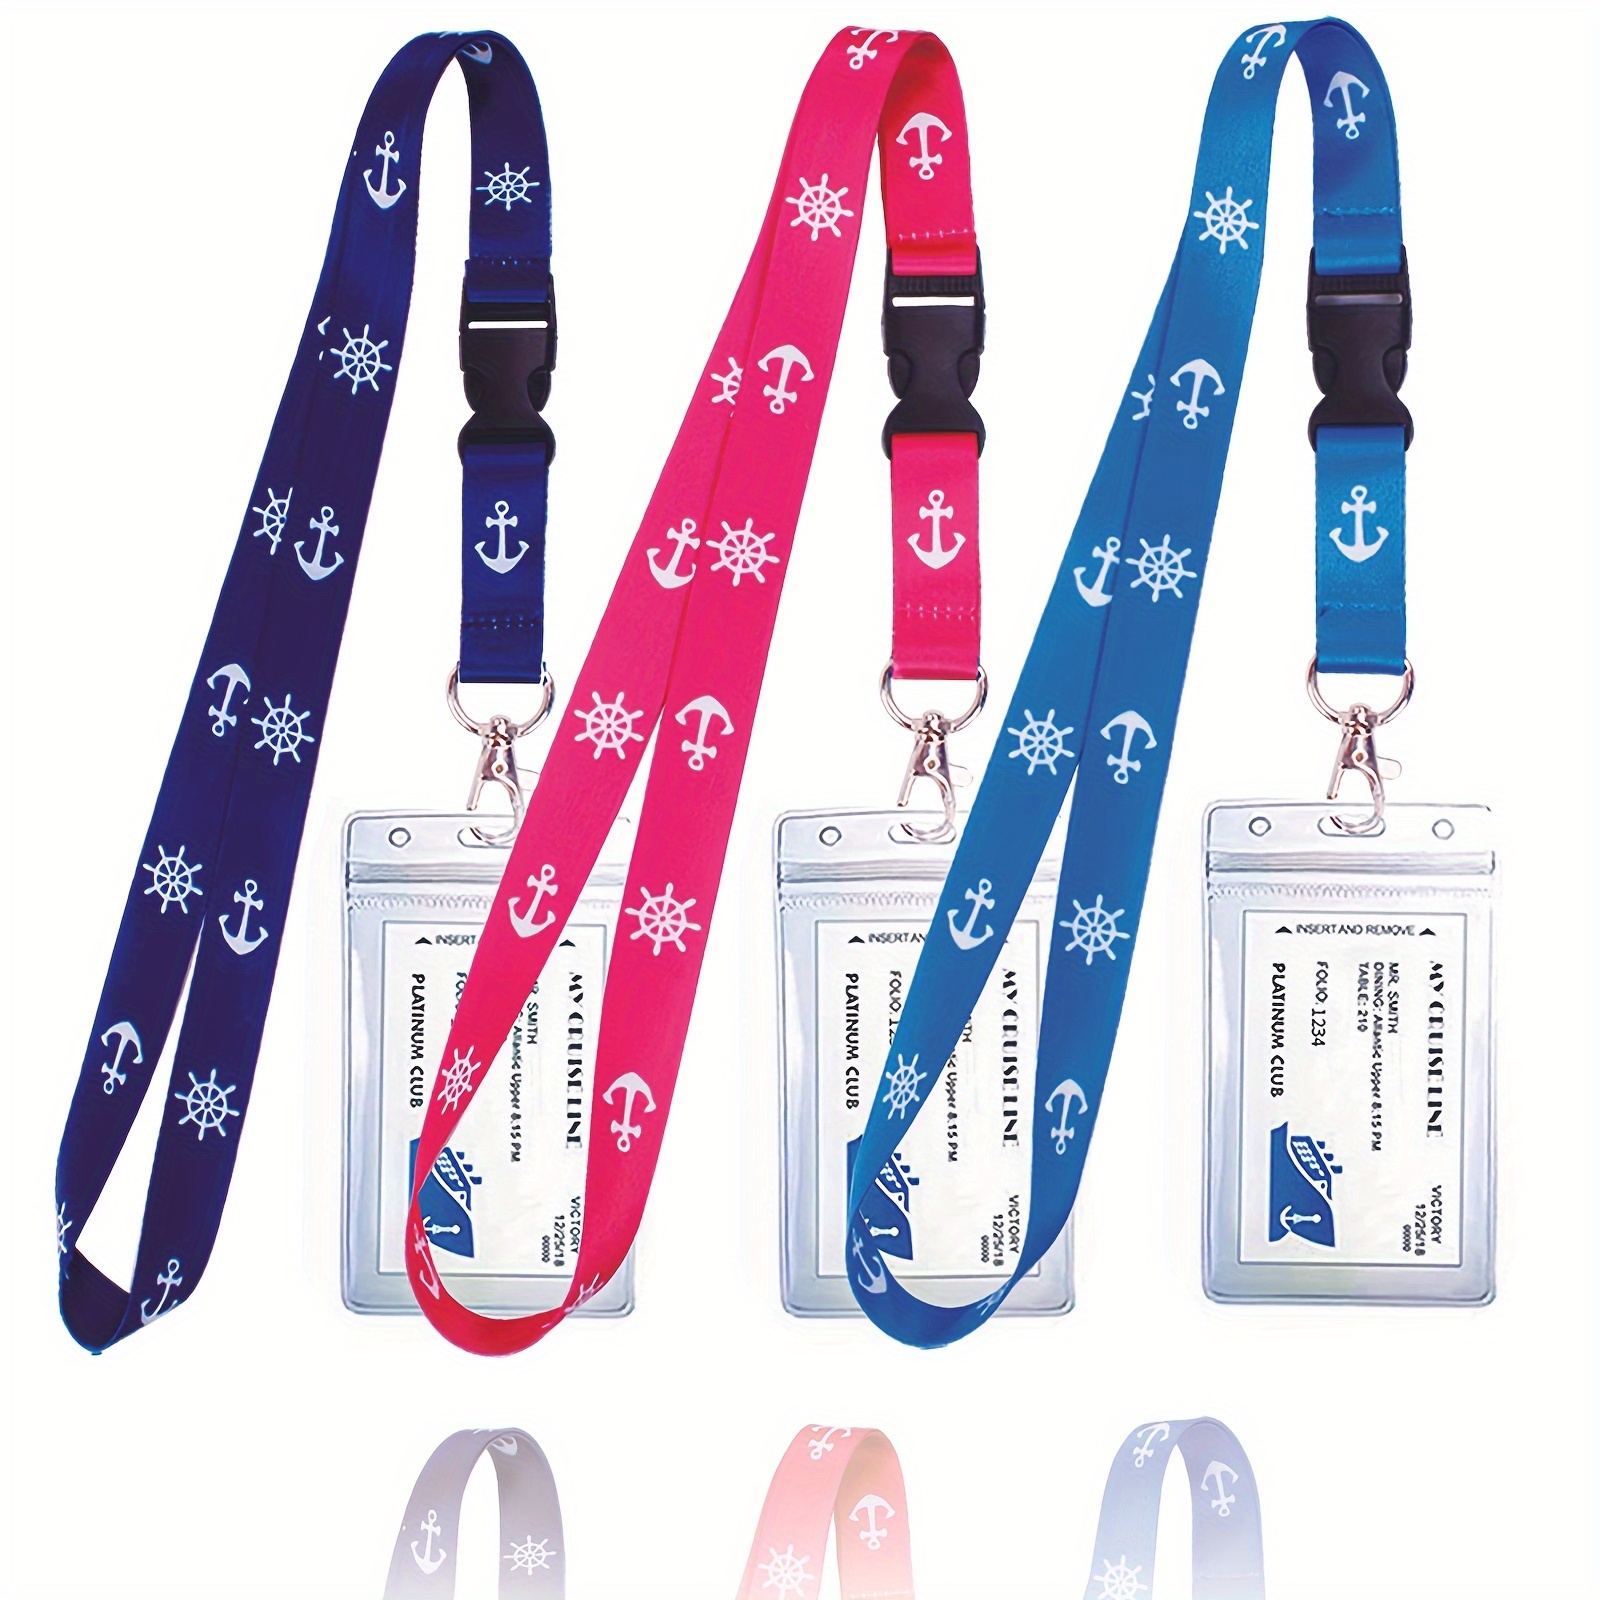 

3 Pack Cruise Lanyards With Waterproof Id Badge Holder, Polyester Fiber Strap With Detachable Buckle & Heavy-duty Zinc Alloy Clasp - Multipurpose Lanyards For Cruise Ship Key Cards & More